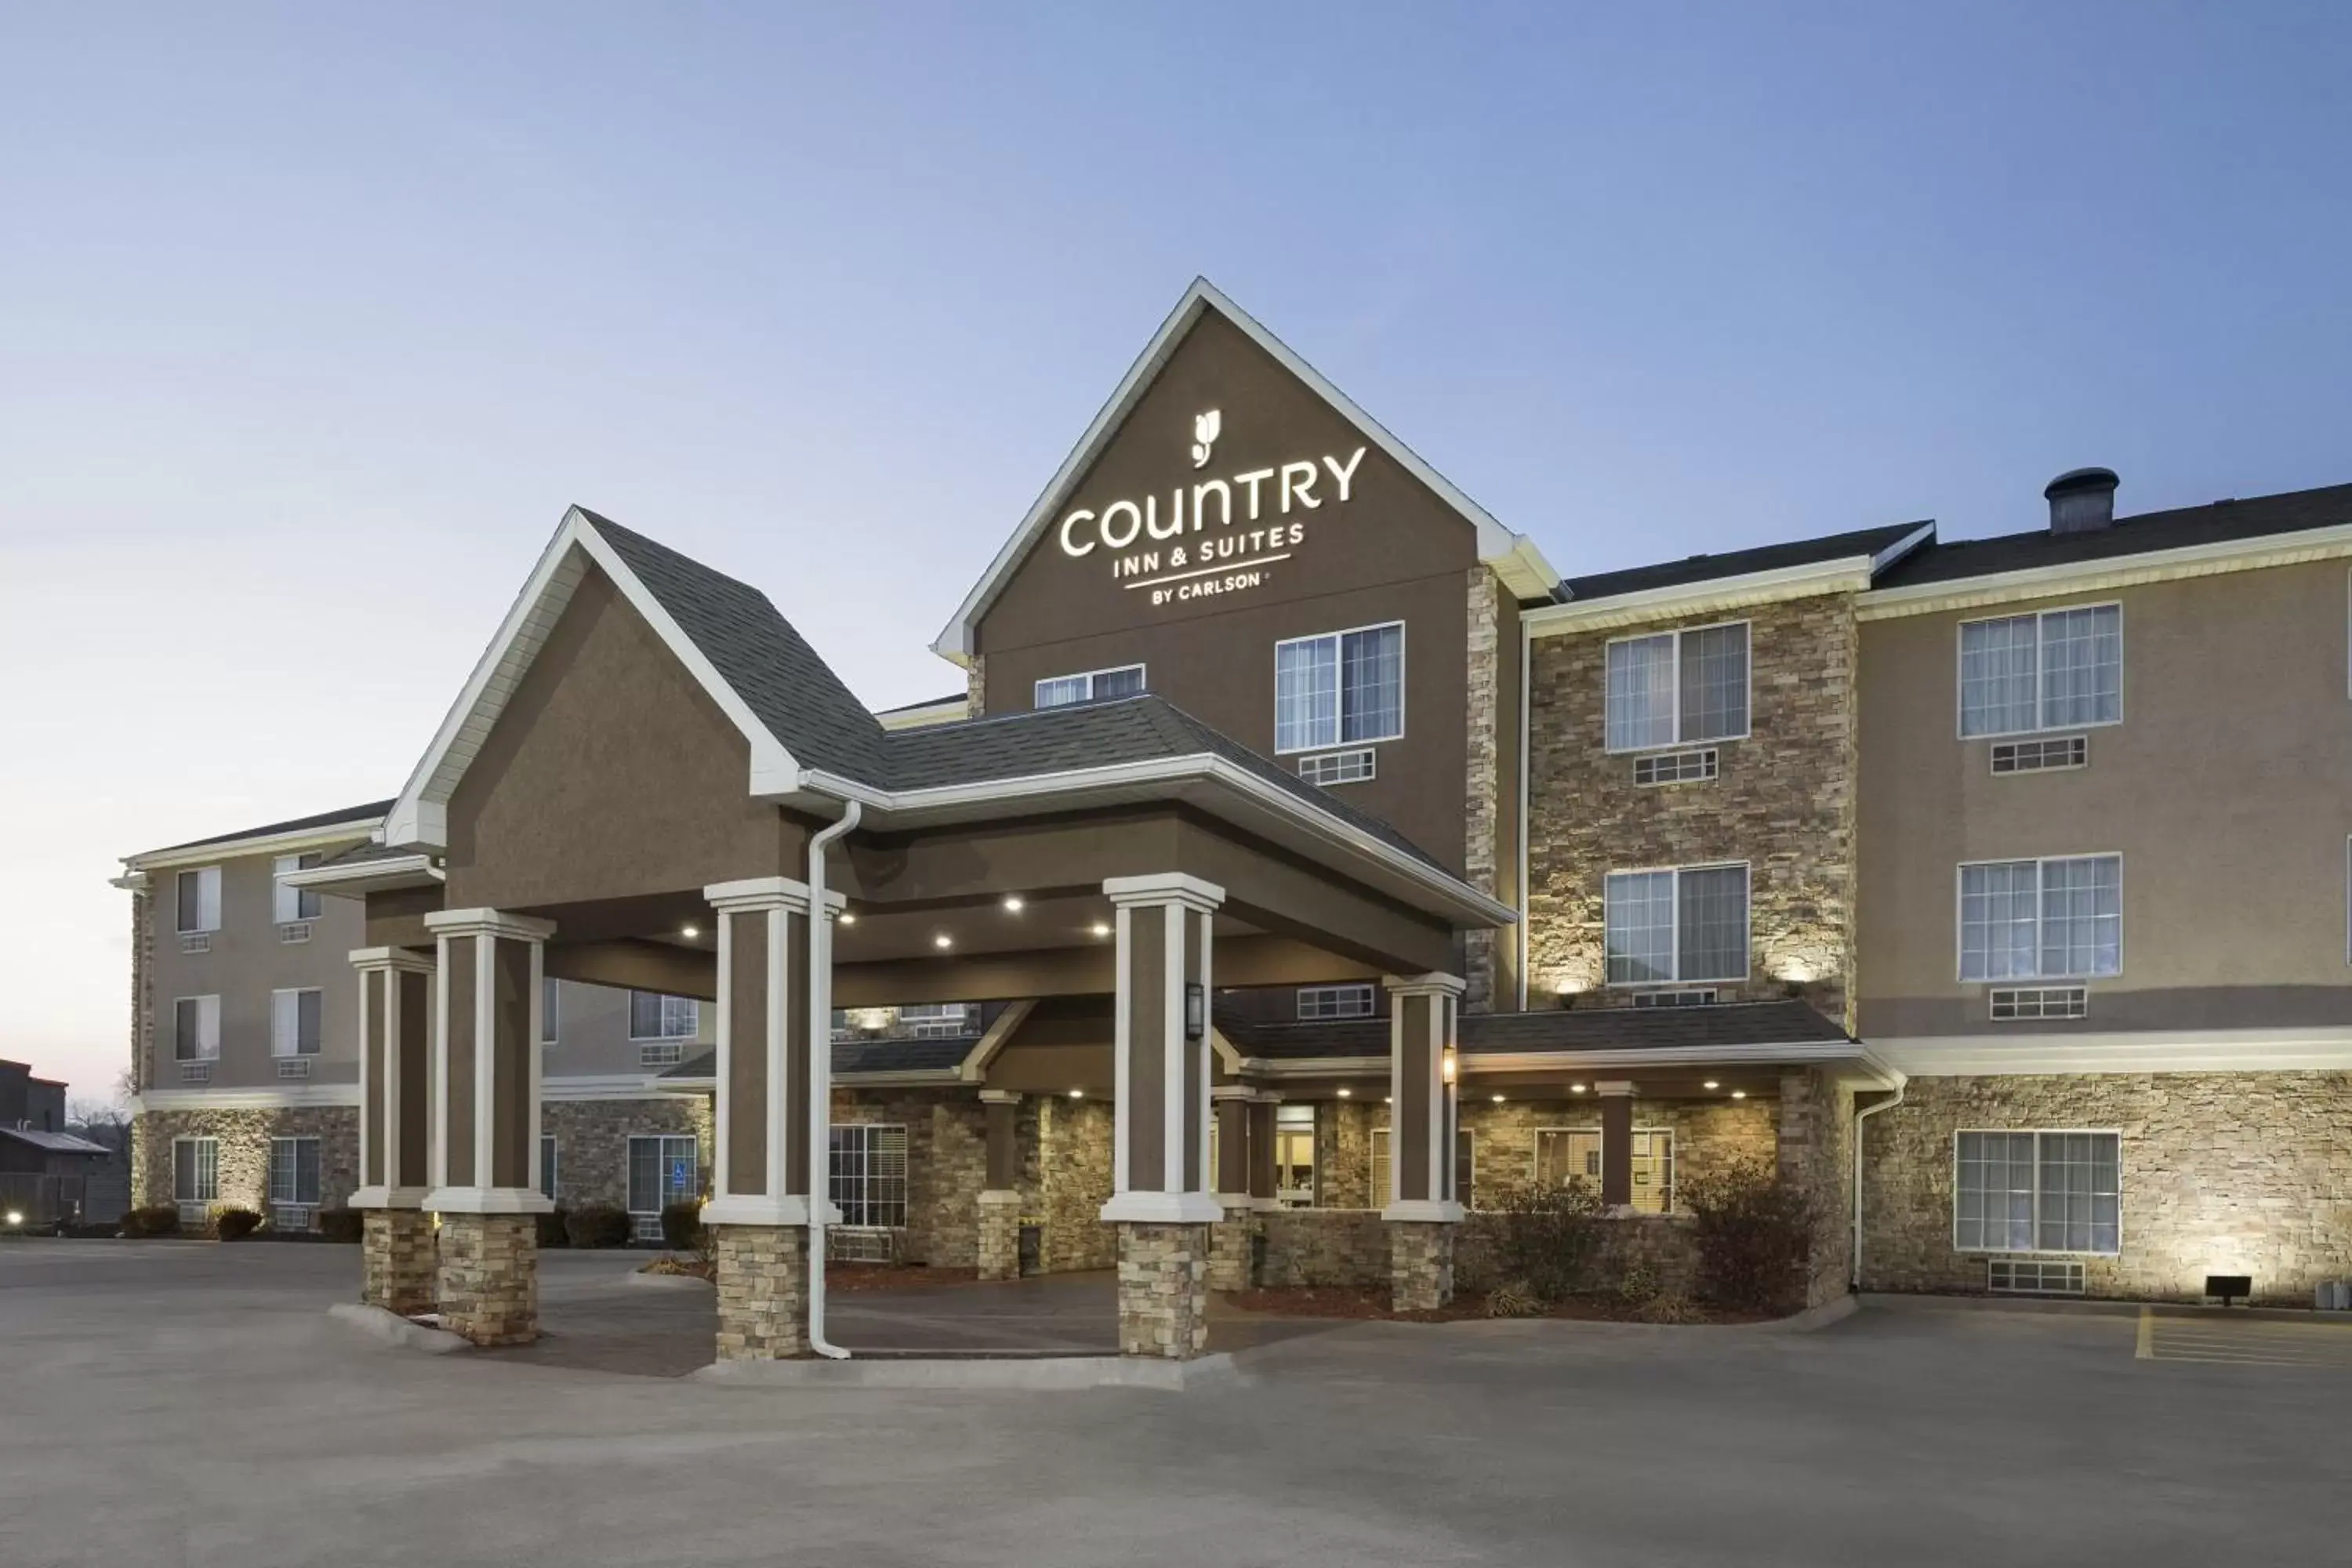 Facade/entrance, Property Building in Country Inn & Suites by Radisson, Topeka West, KS